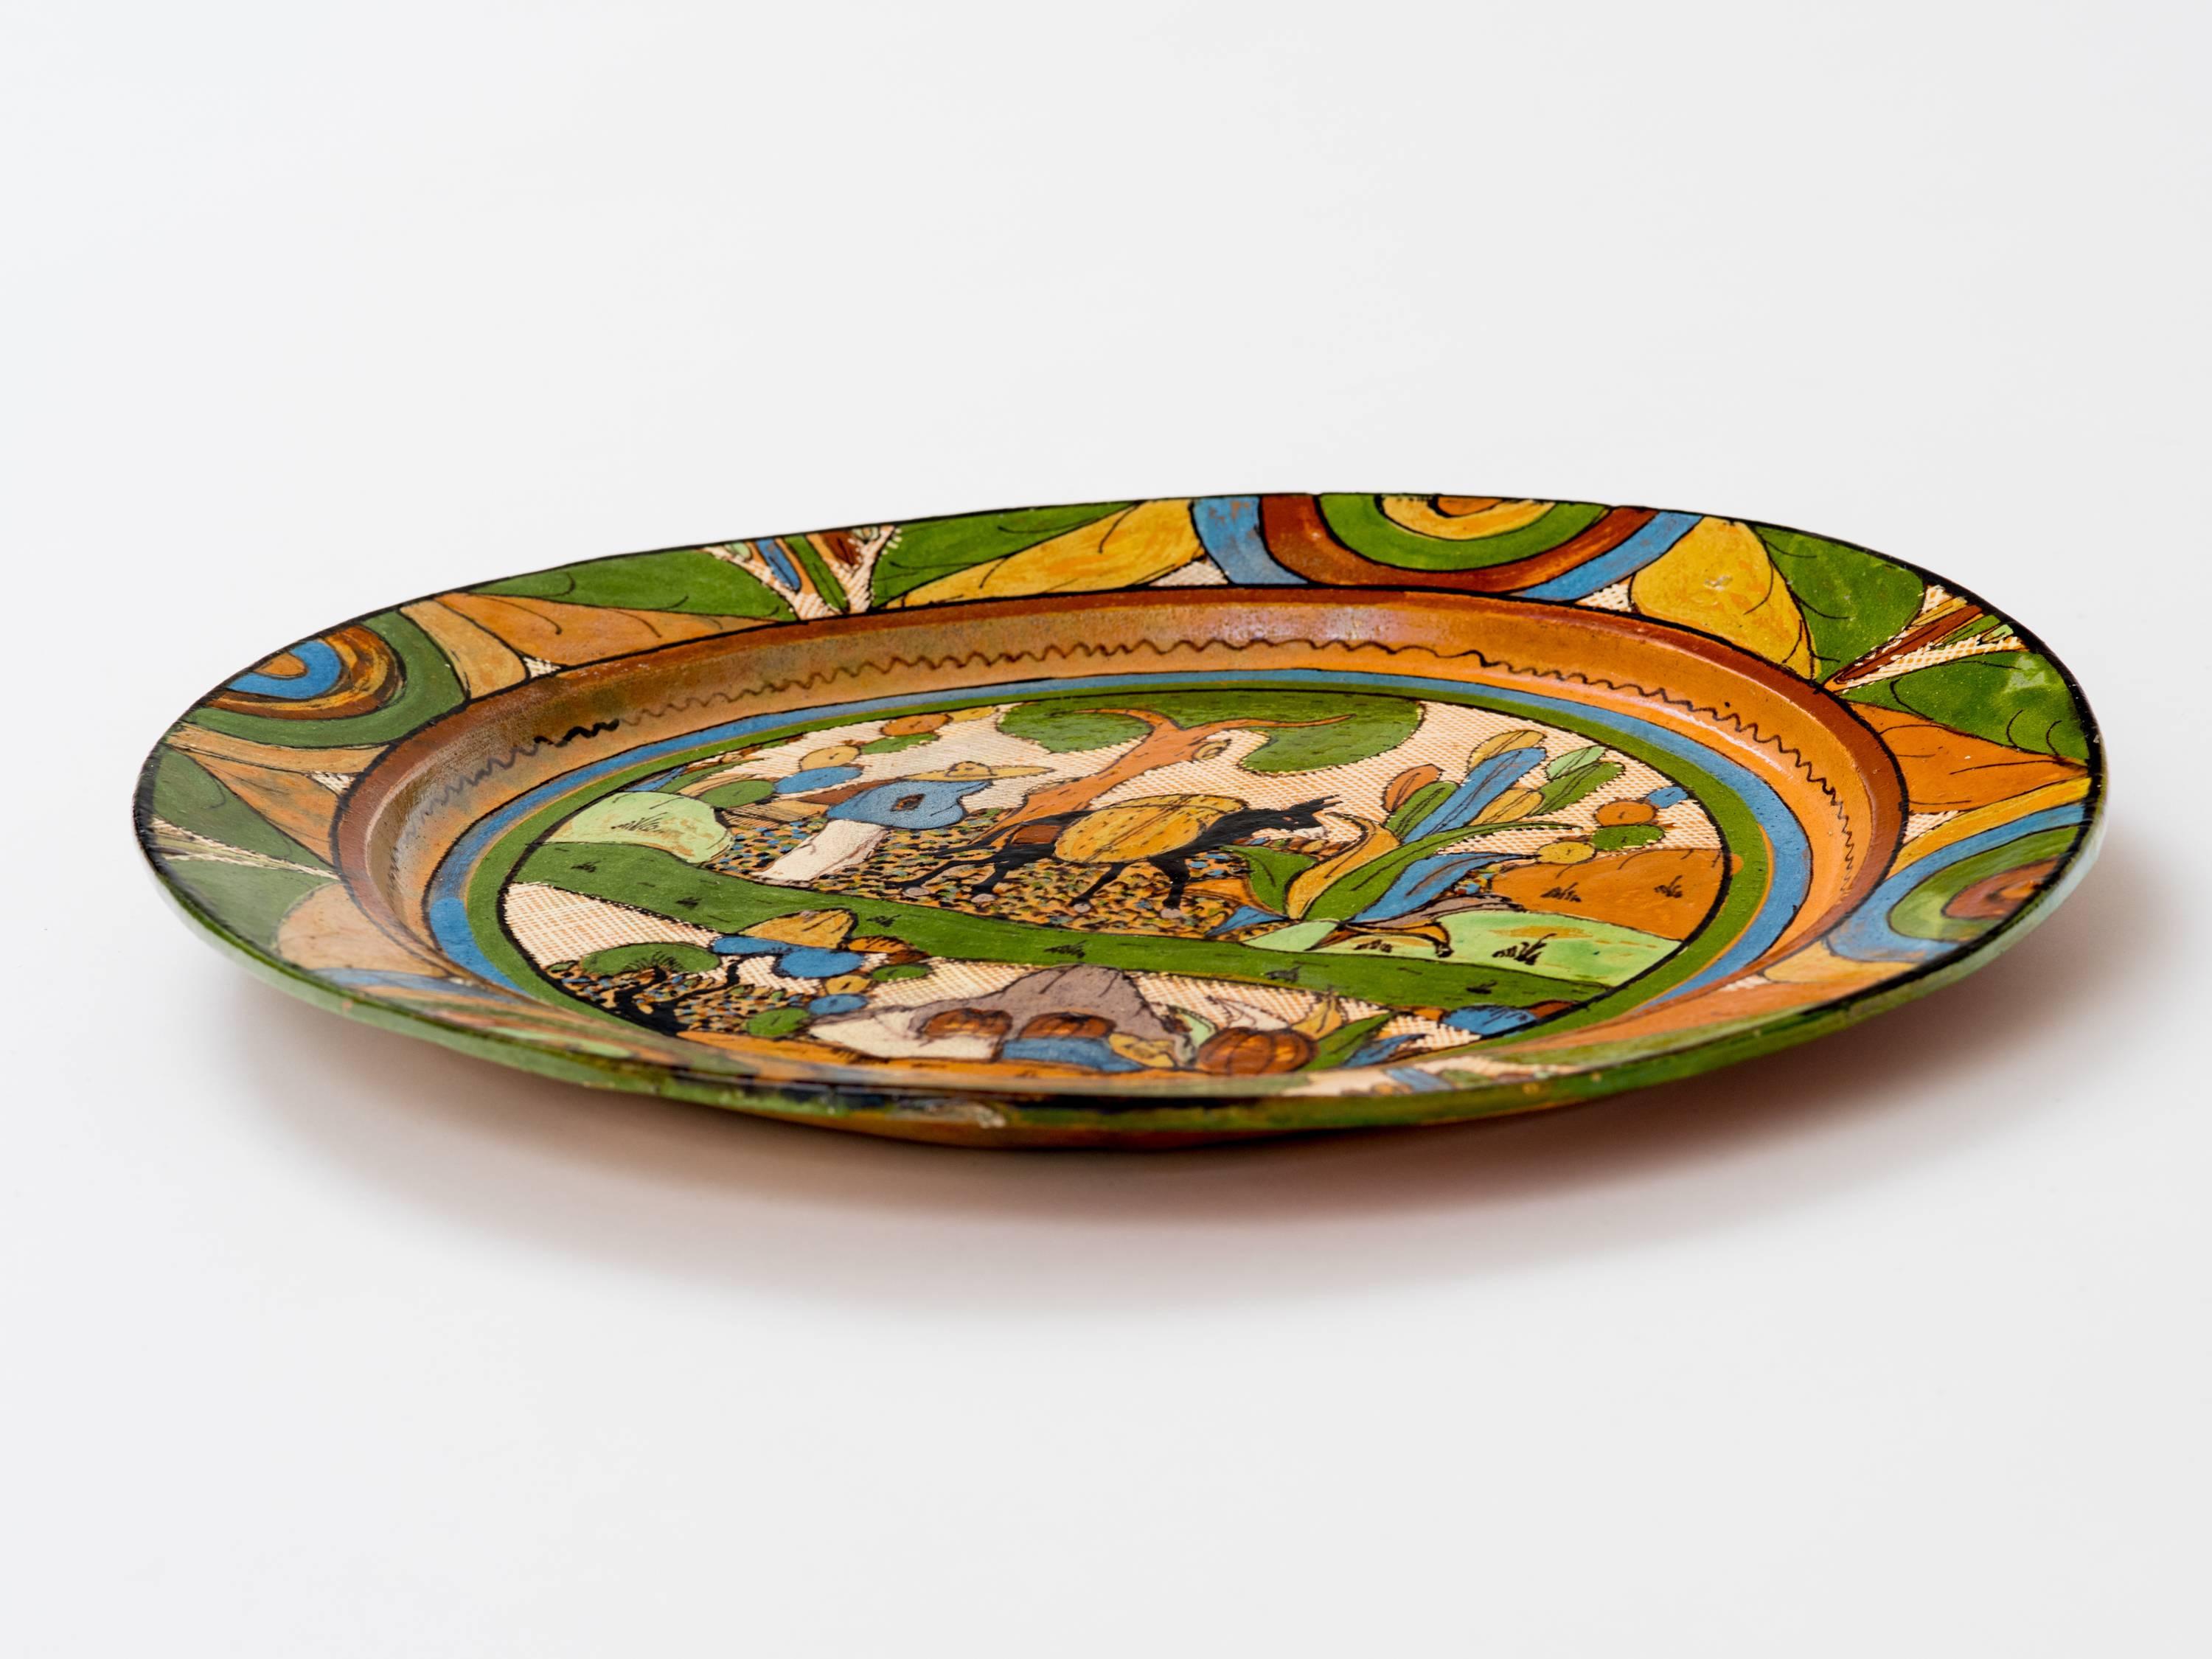 Tlaquepaque 1930s Mexican Hand-Painted Ceramic Charger Tray 2